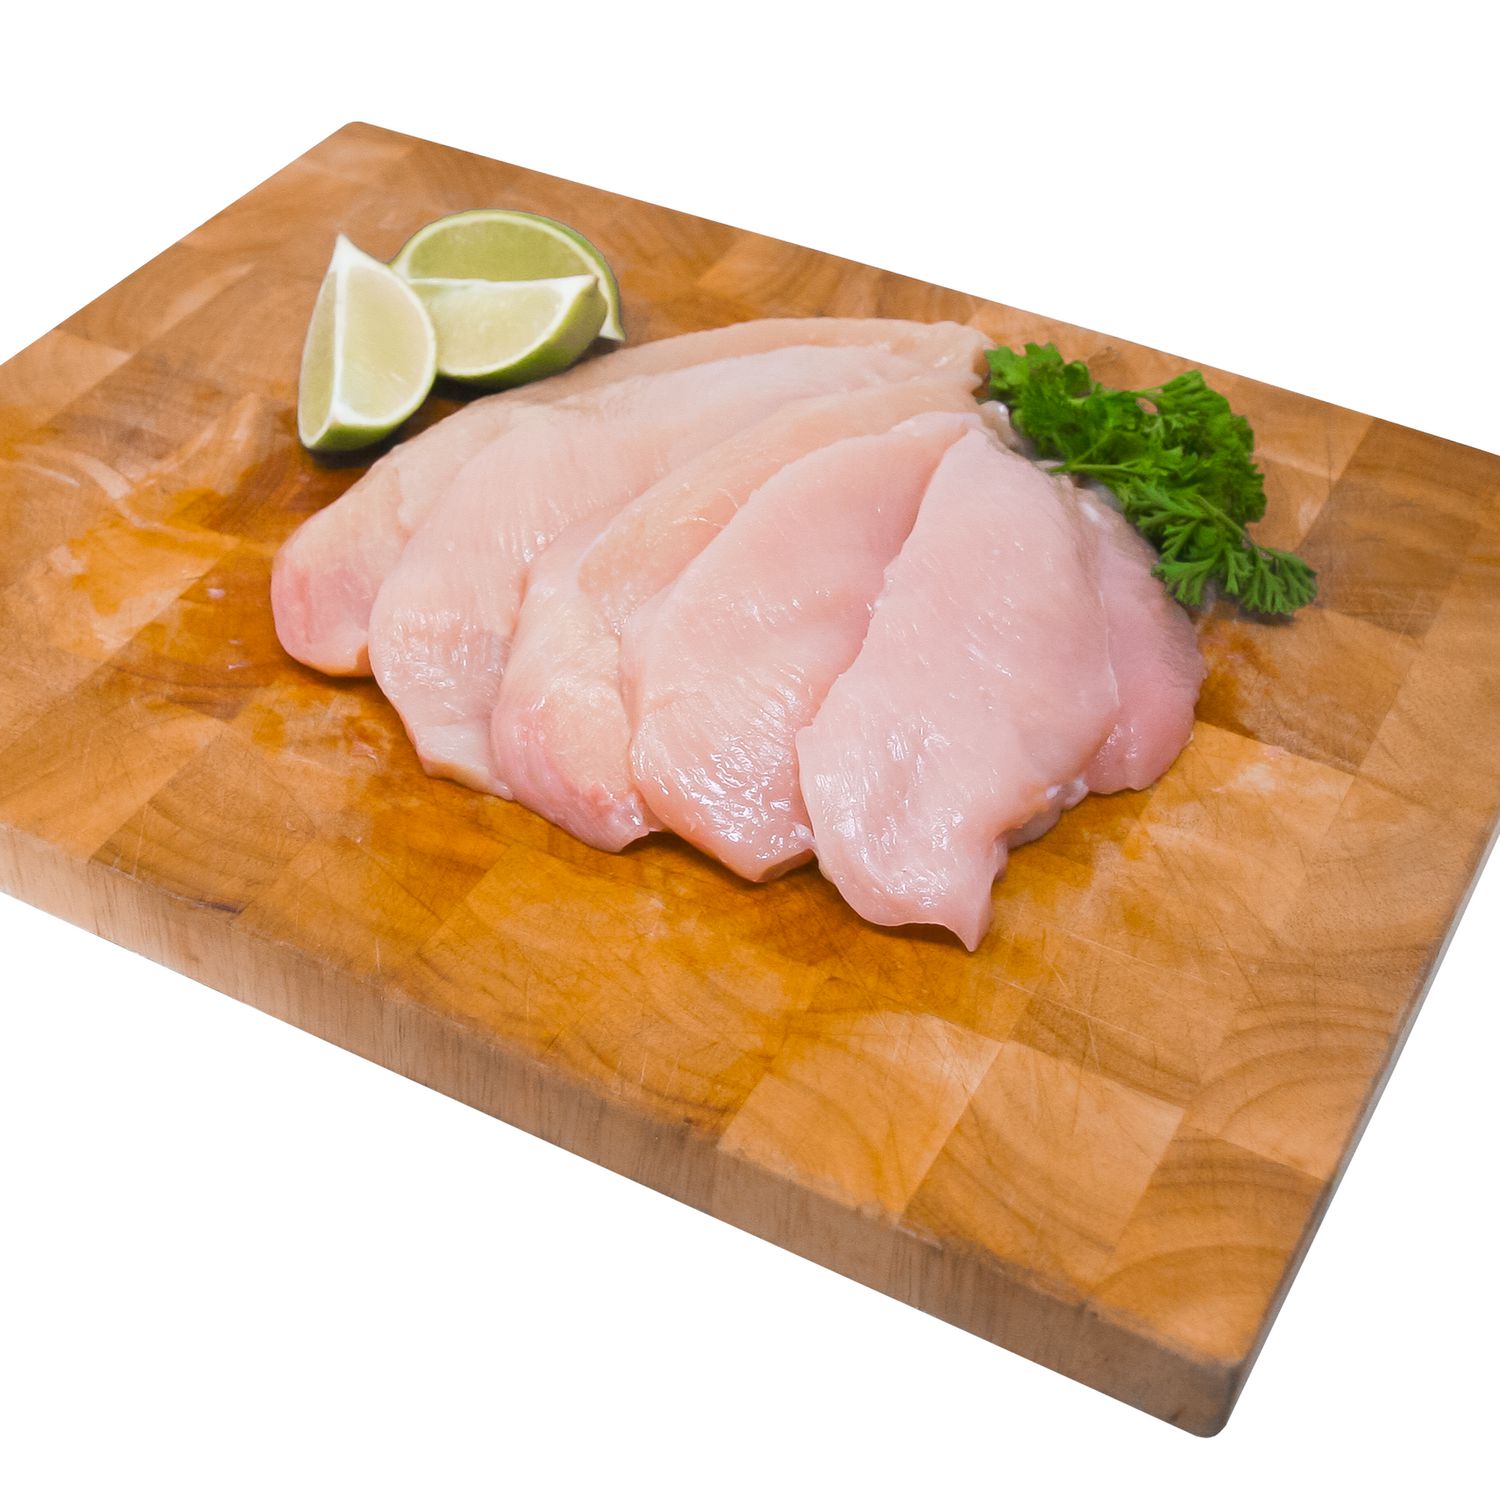 Prime Sliced Boneless Skinless Chicken Breasts Raised Without Antibiotics,  5 Breasts